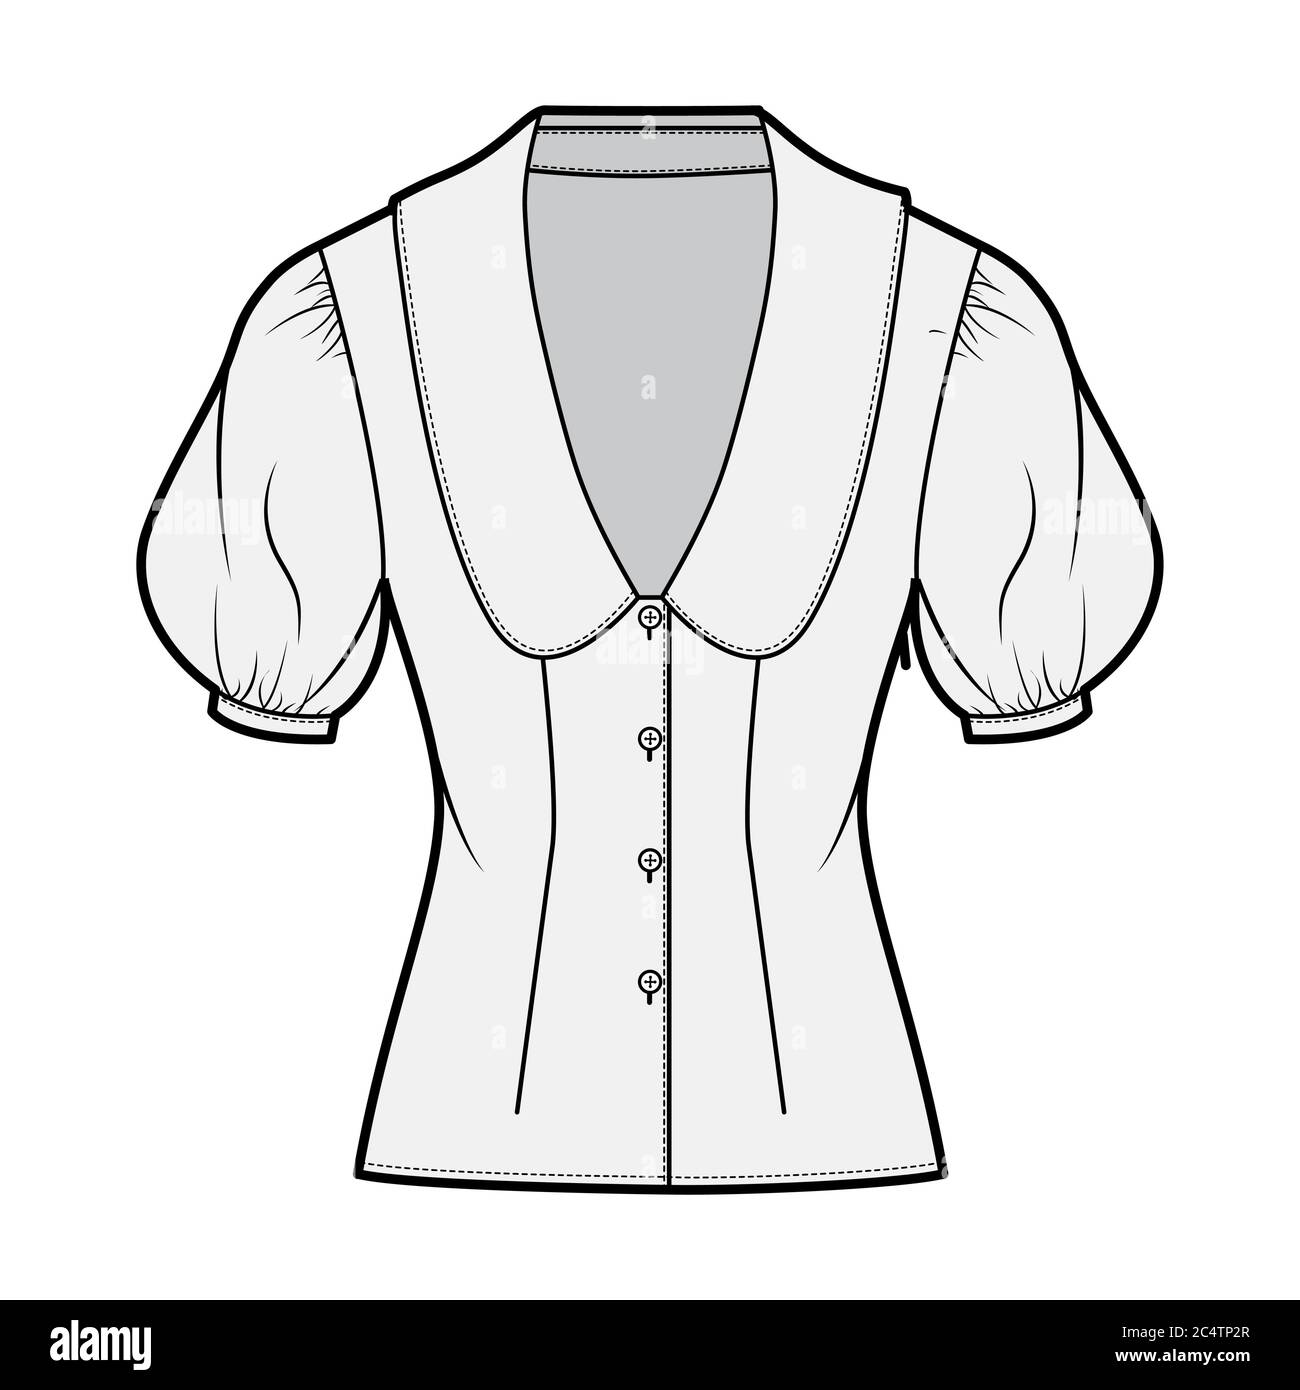 Blouse technical fashion illustration with collar framing the plunging V neck, oversized medium puffed sleeves, fitted body. Flat apparel template front grey color. Women men unisex CAD garment mockup Stock Vector